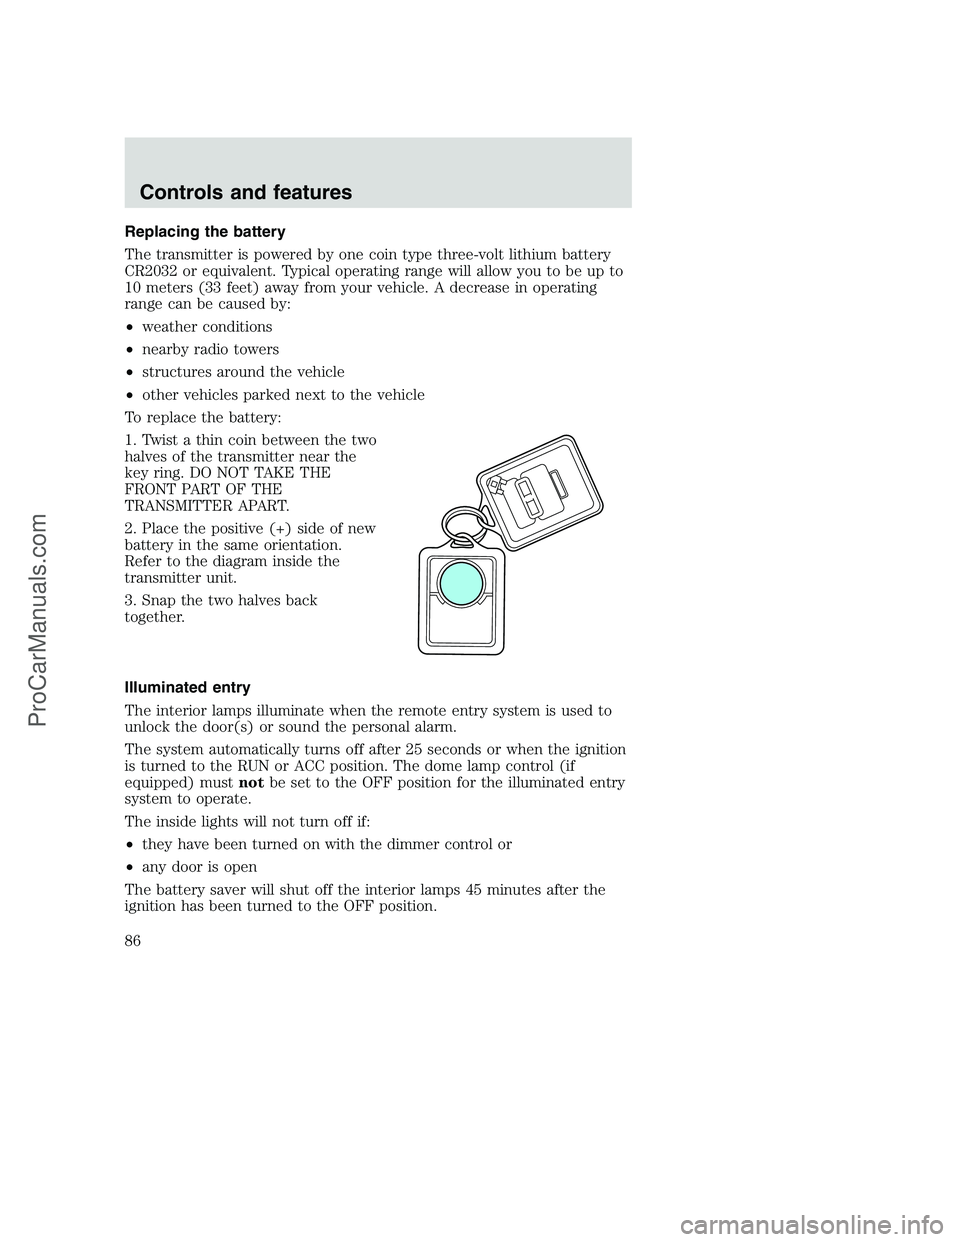 FORD F350 2001  Owners Manual Replacing the battery
The transmitter is powered by one coin type three-volt lithium battery
CR2032 or equivalent. Typical operating range will allow you to be up to
10 meters (33 feet) away from your